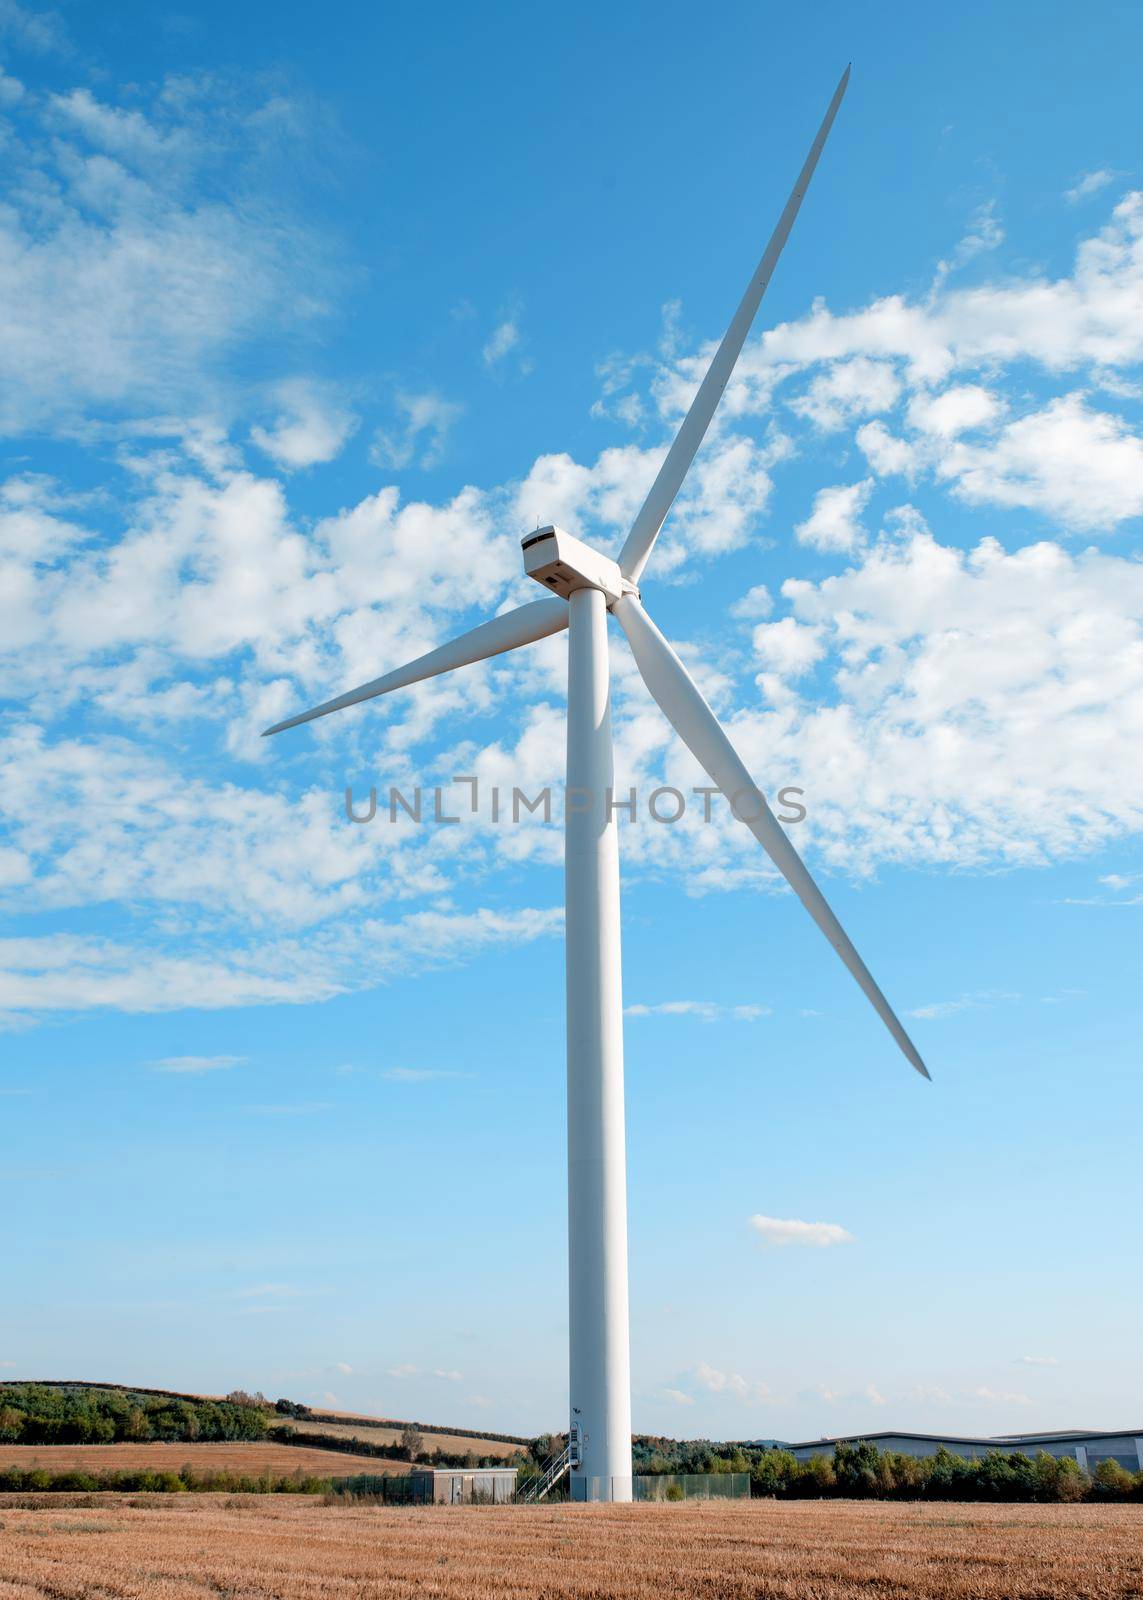 wind turbine in the field against blue sky on sunny day by Iryna_Melnyk